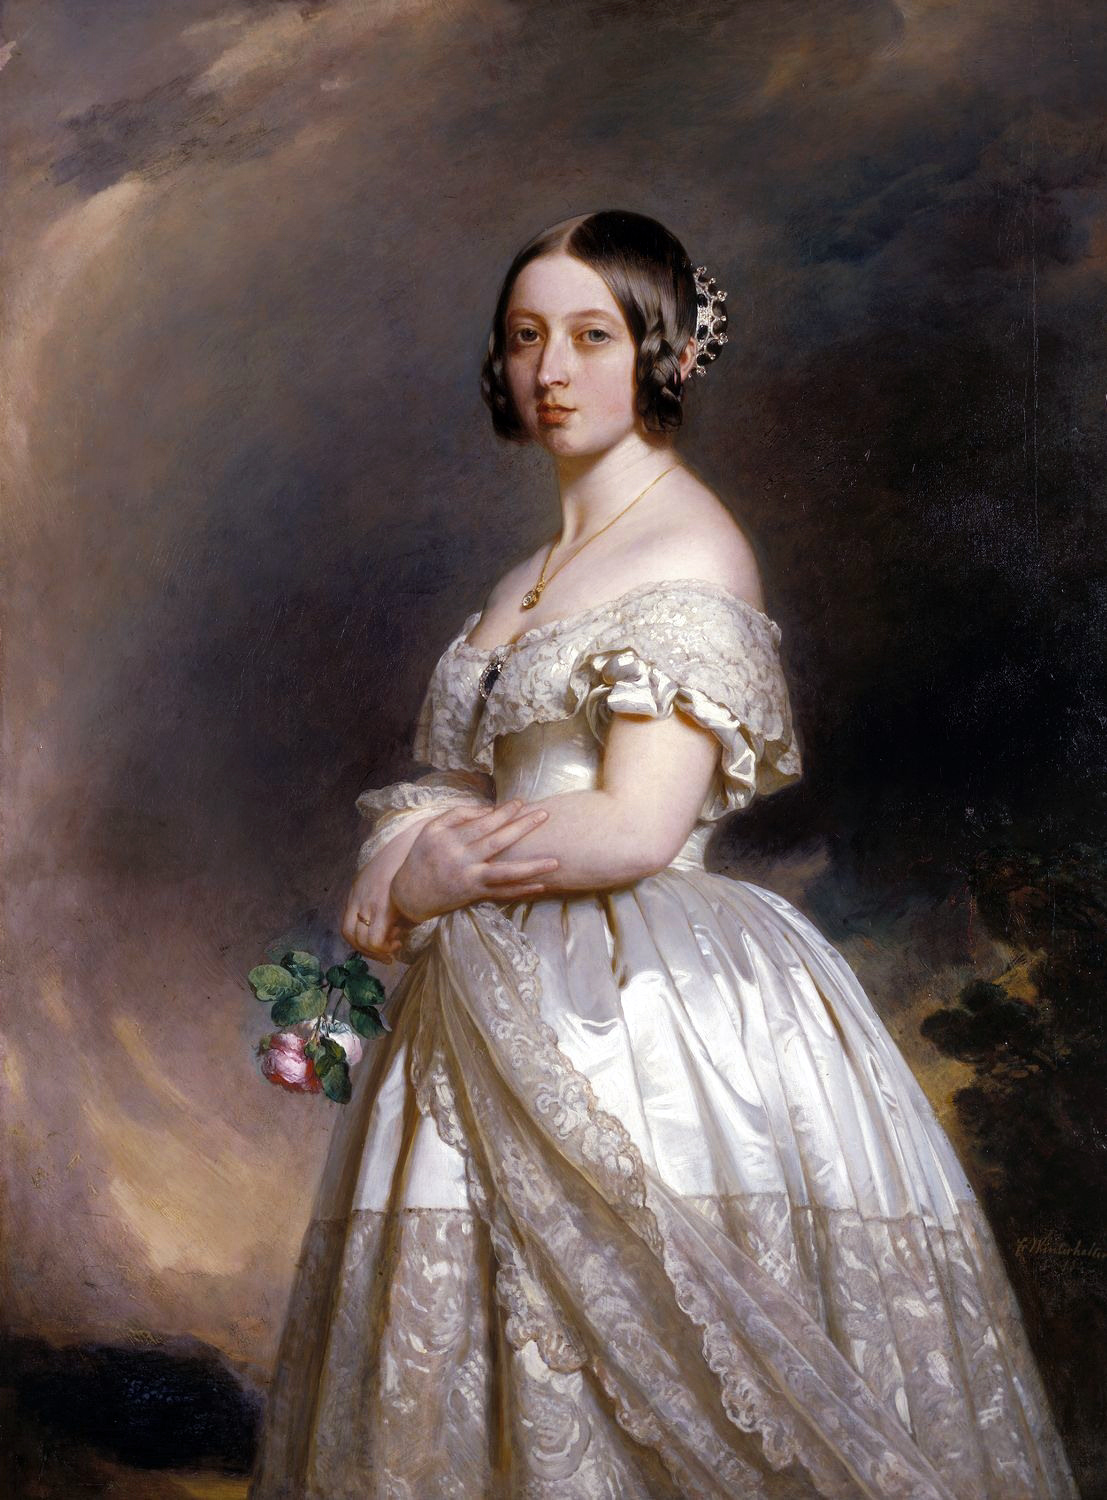 Fashion History Mythbusters: Victoria, Queen of Fashion
